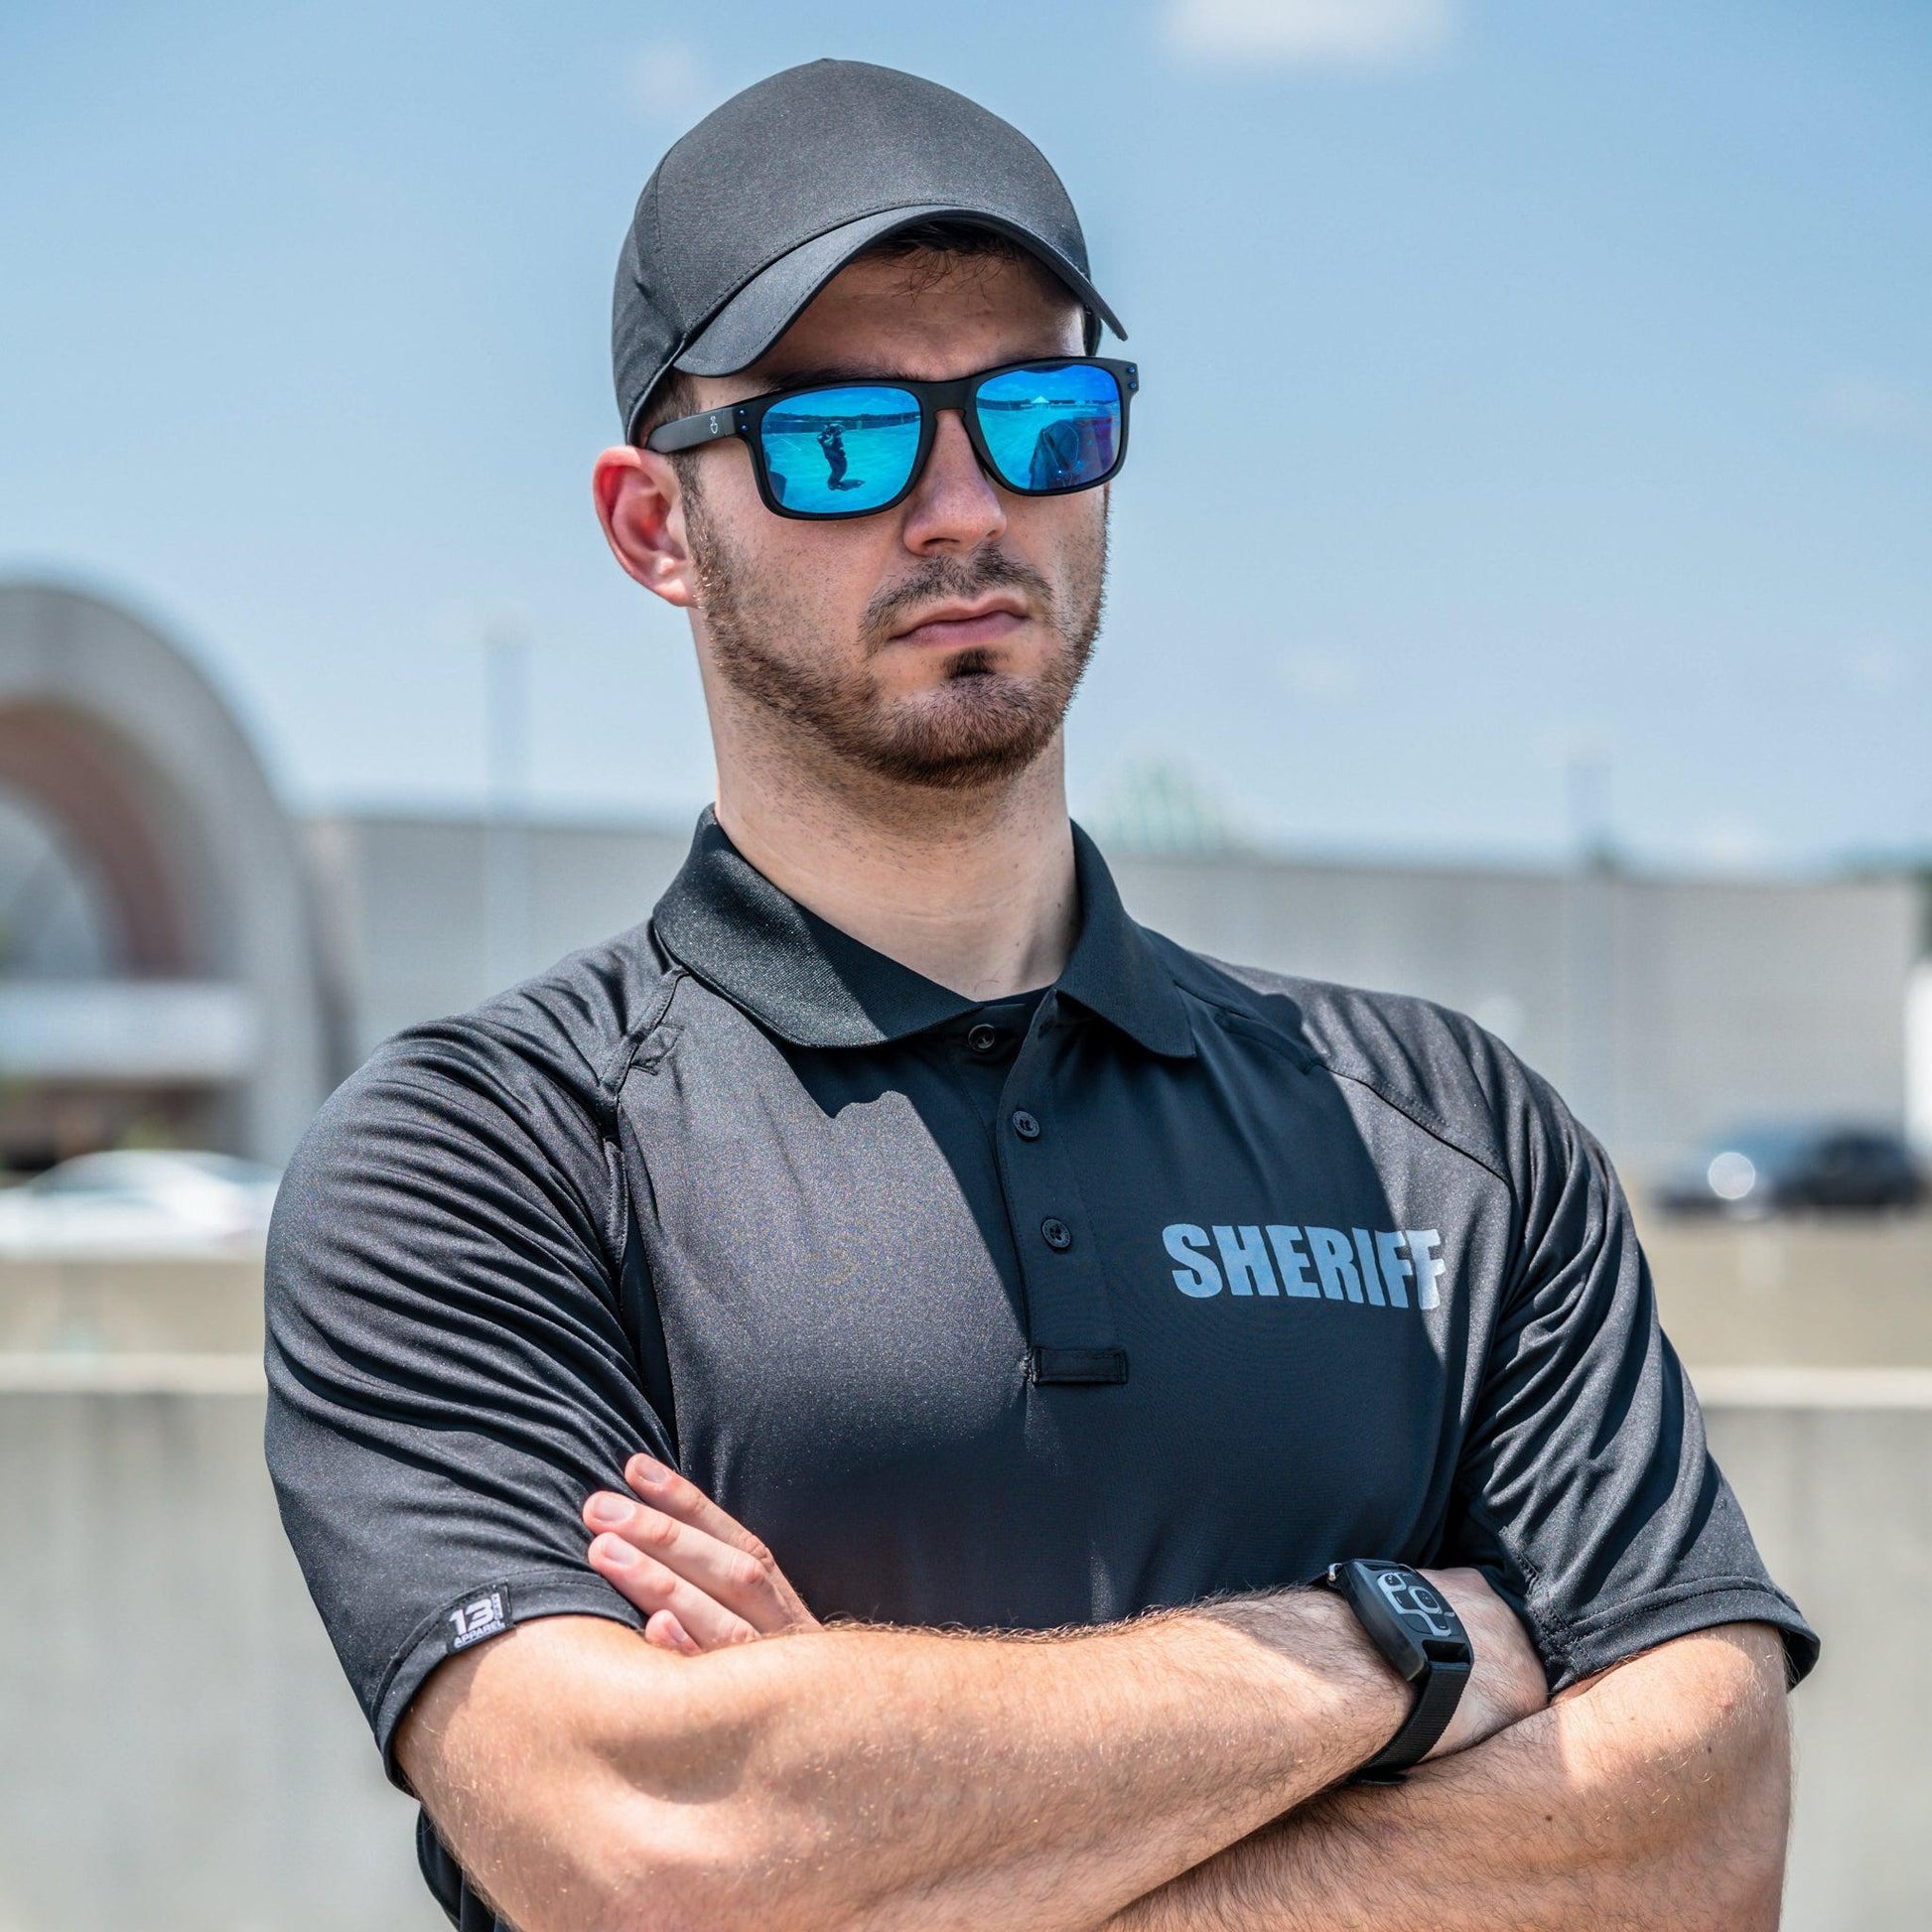 [SHERIFF] Men's Performance Polo [BLK/GRY]-13 Fifty Apparel